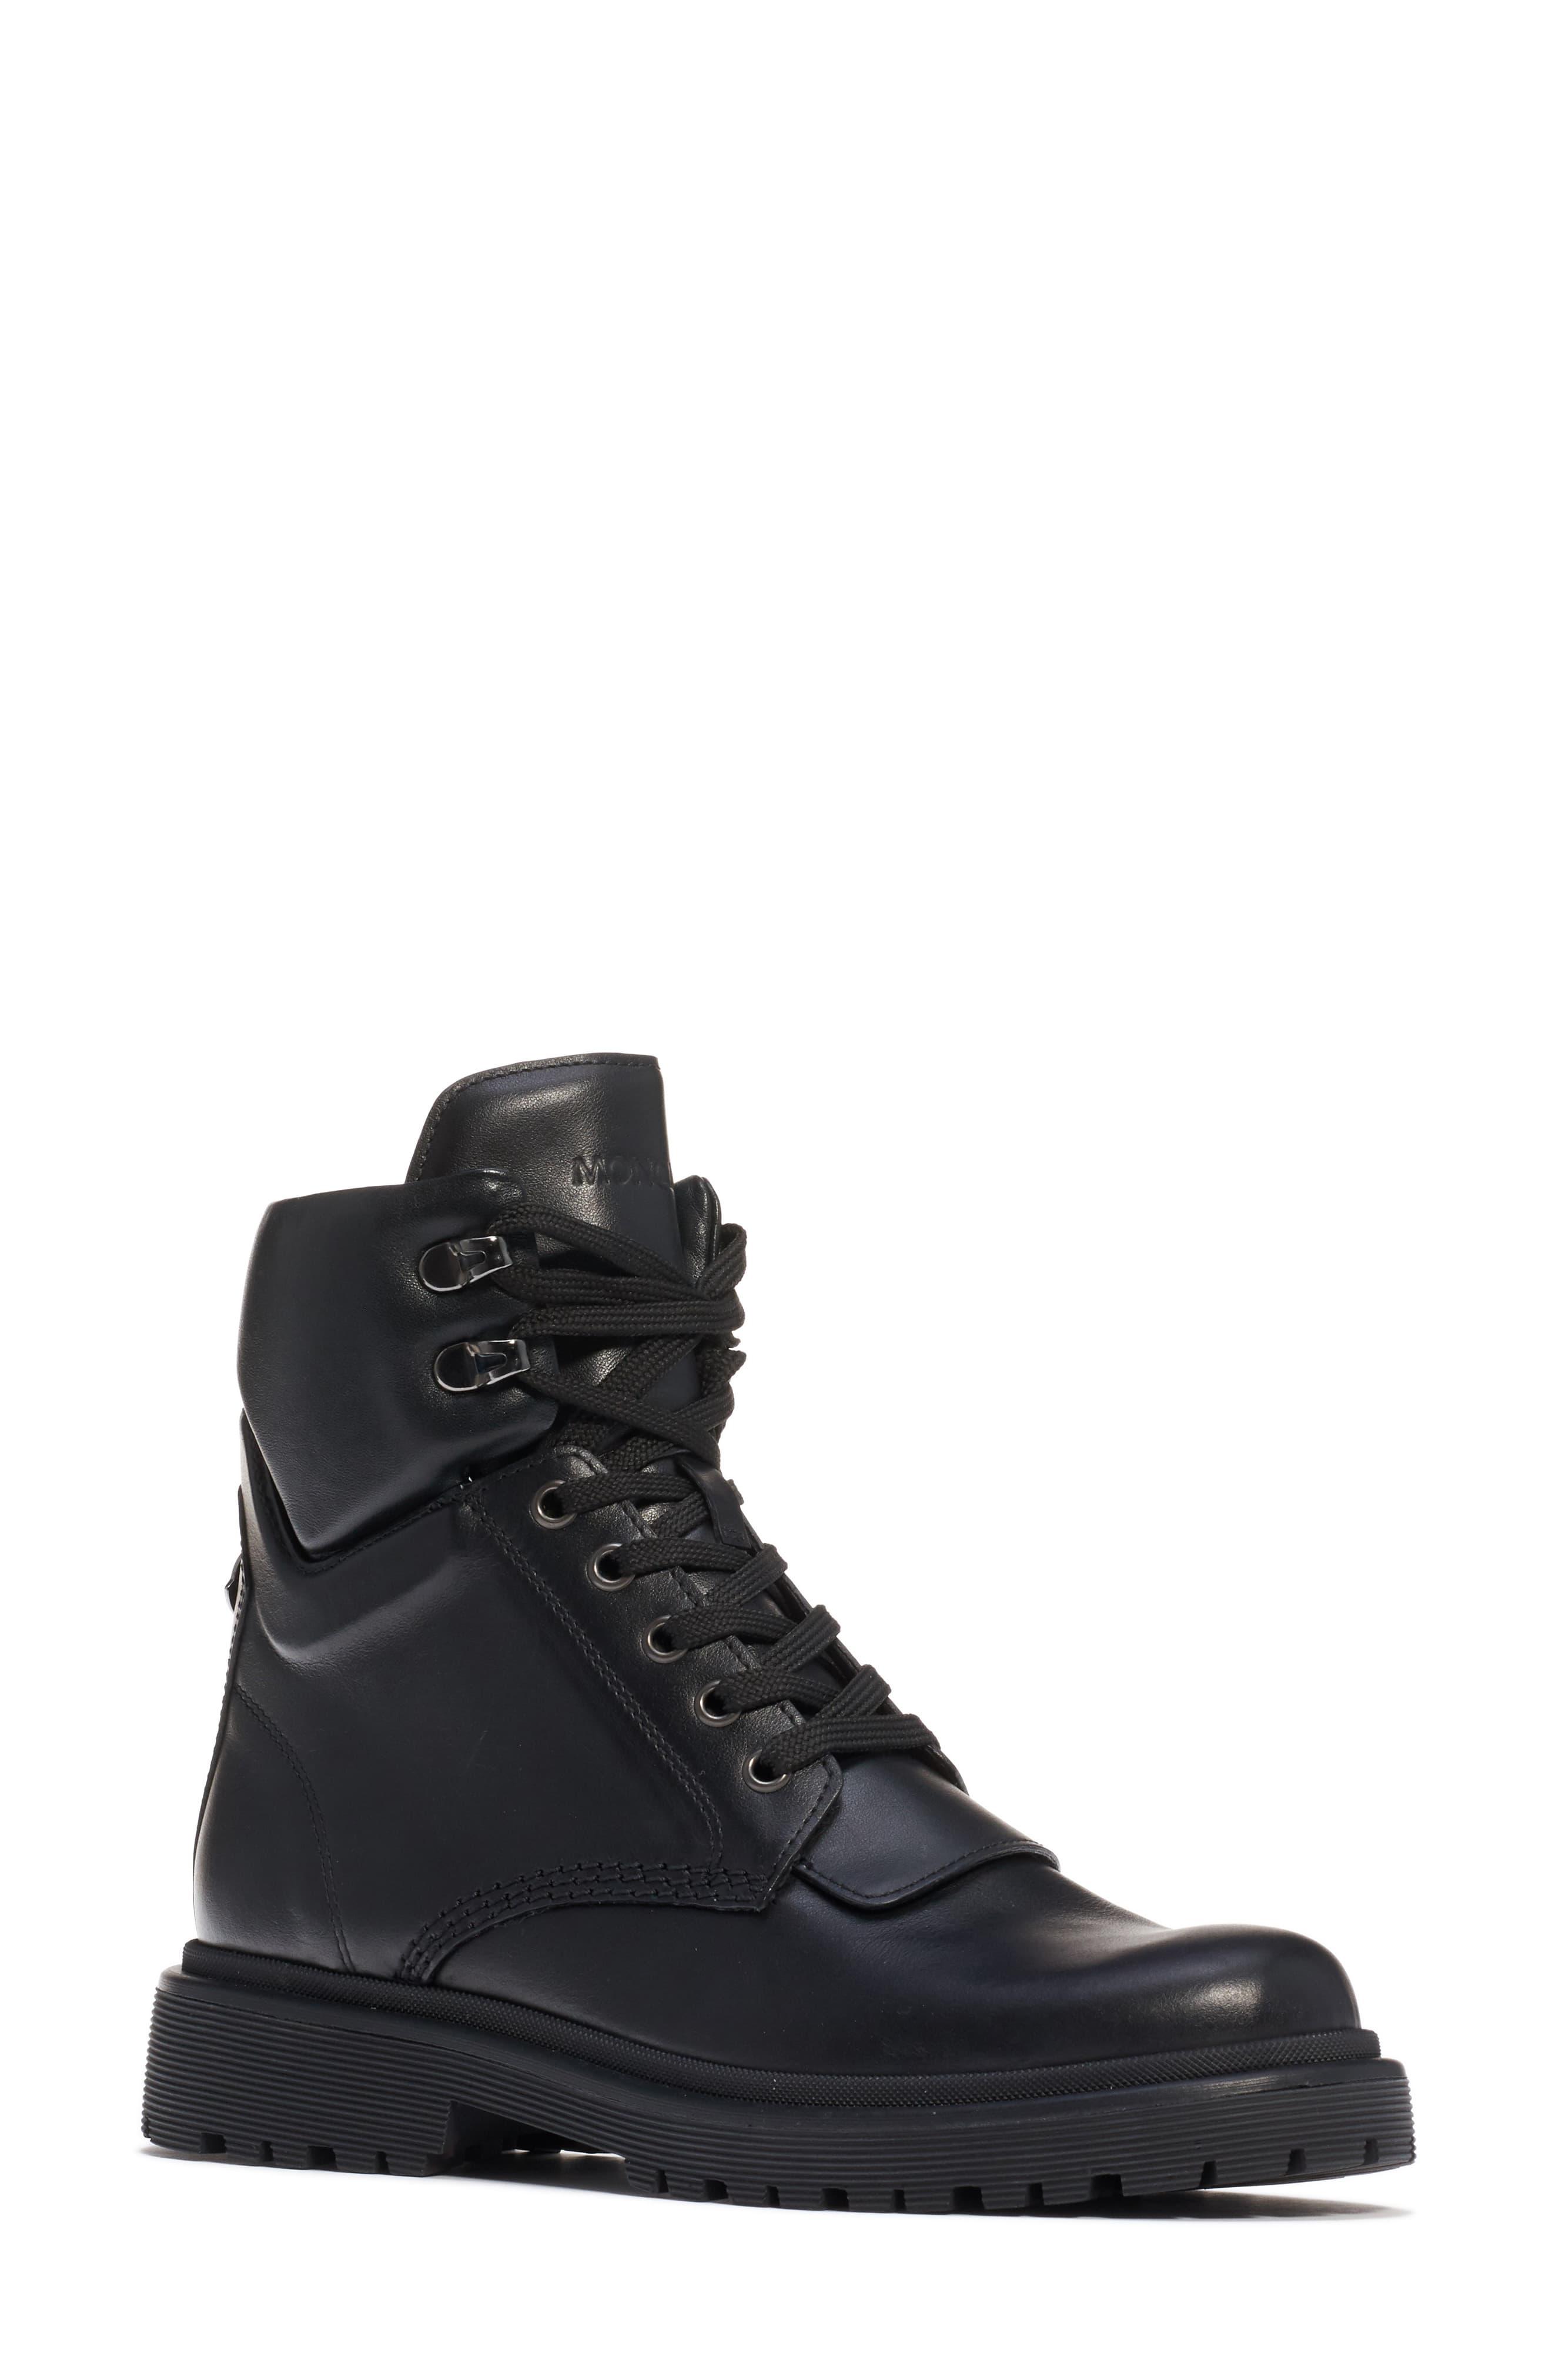 Moncler Patty Combat Boot in Black - Lyst